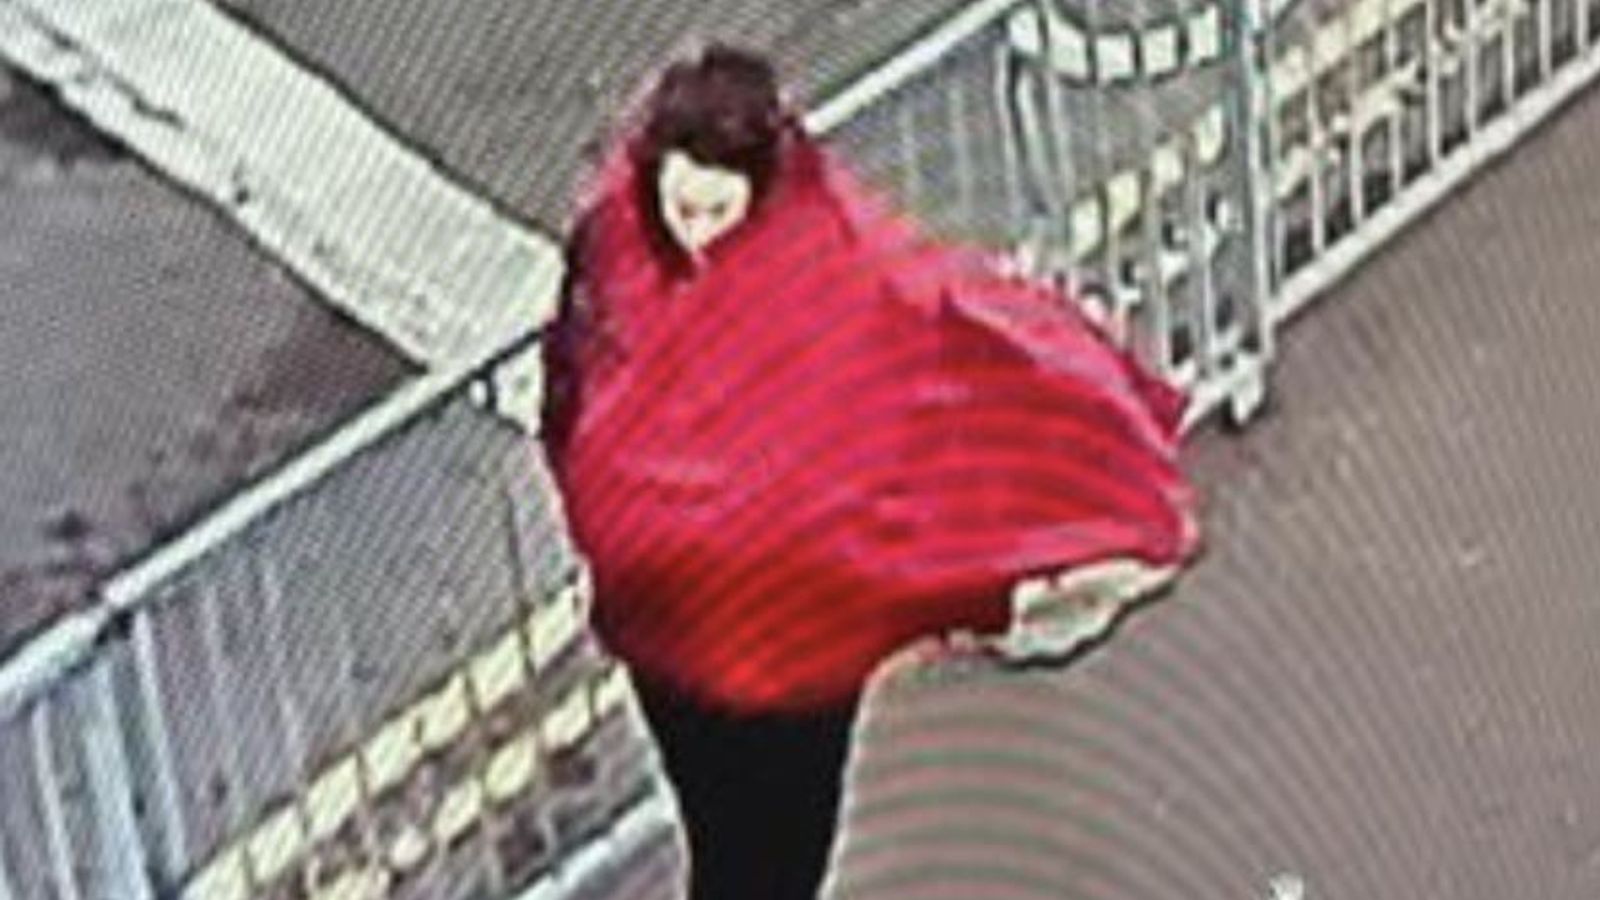 Police searching for mother missing with baby and father release CCTV image thought to show her in Harwich